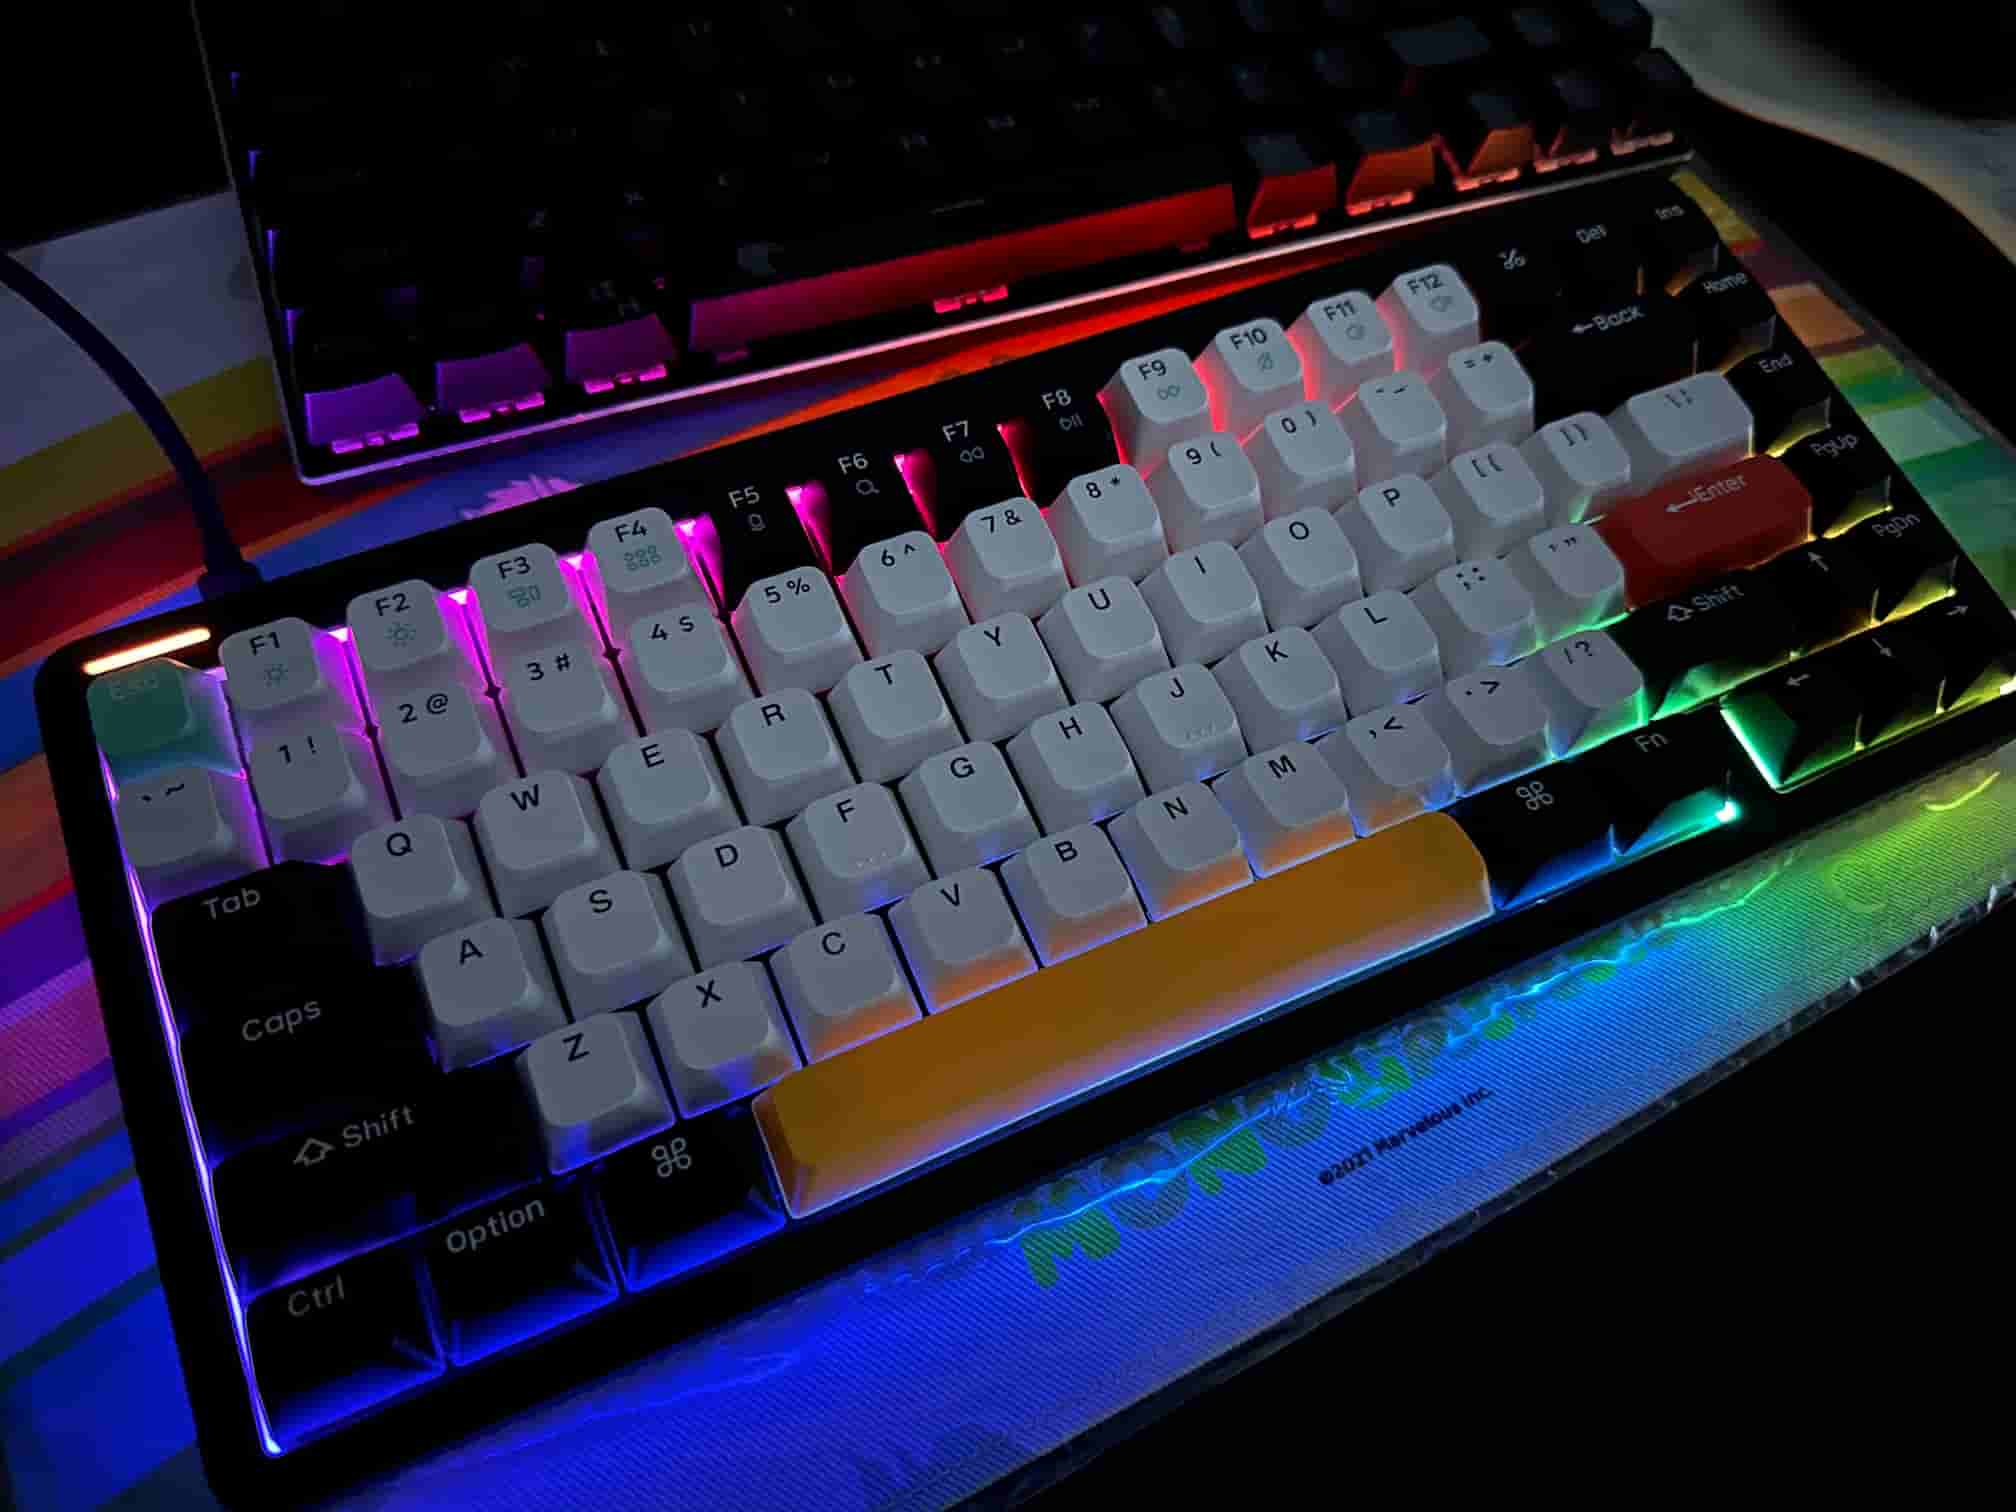 Illuminated NuPhy Halo75 mechanical keyboard with backlit keys in various colors, showcasing a vibrant RGB light display